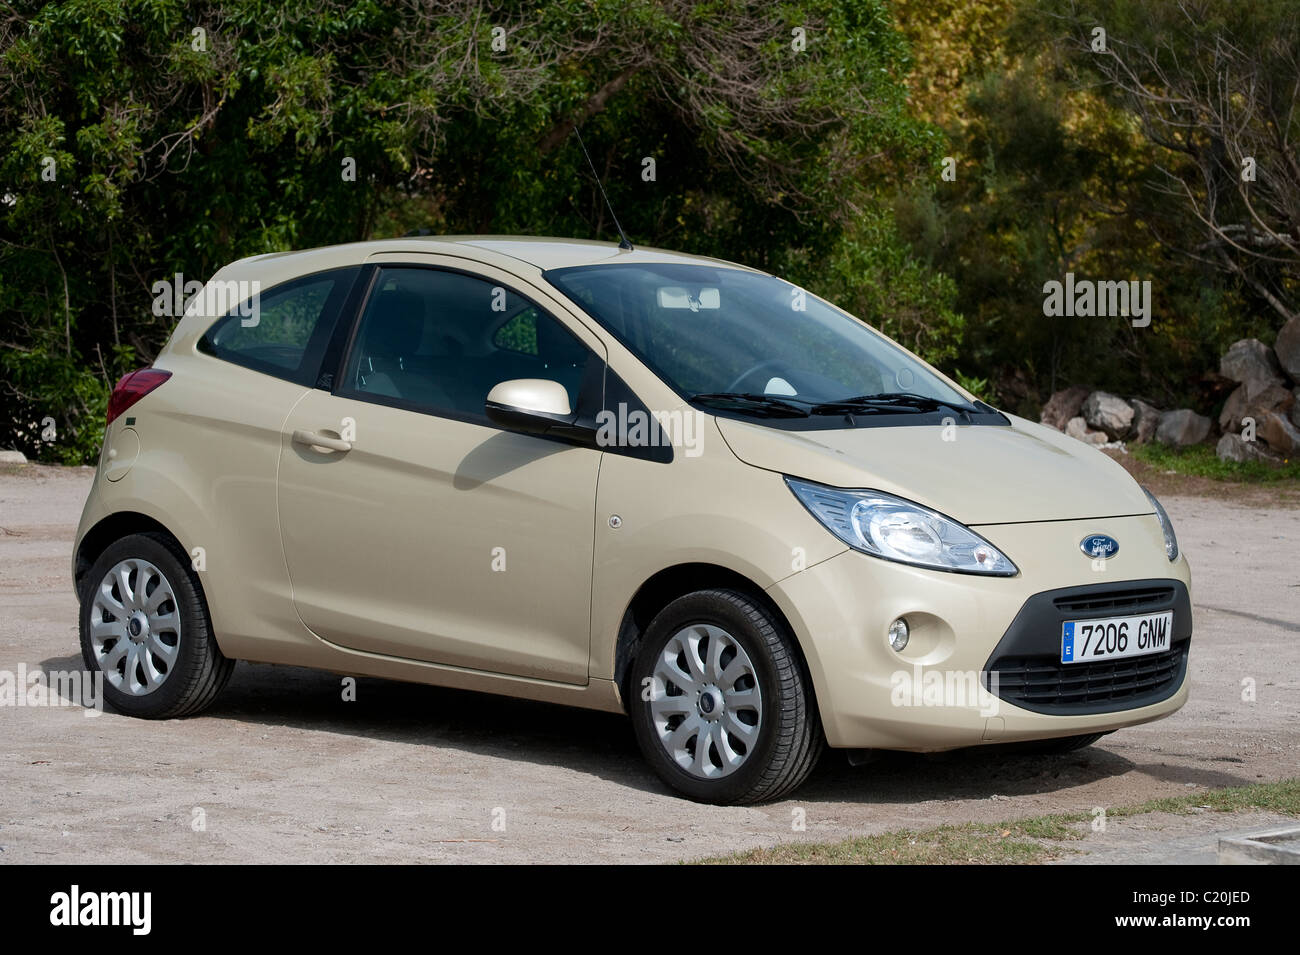 Ford Fiesta voiture. Banque D'Images